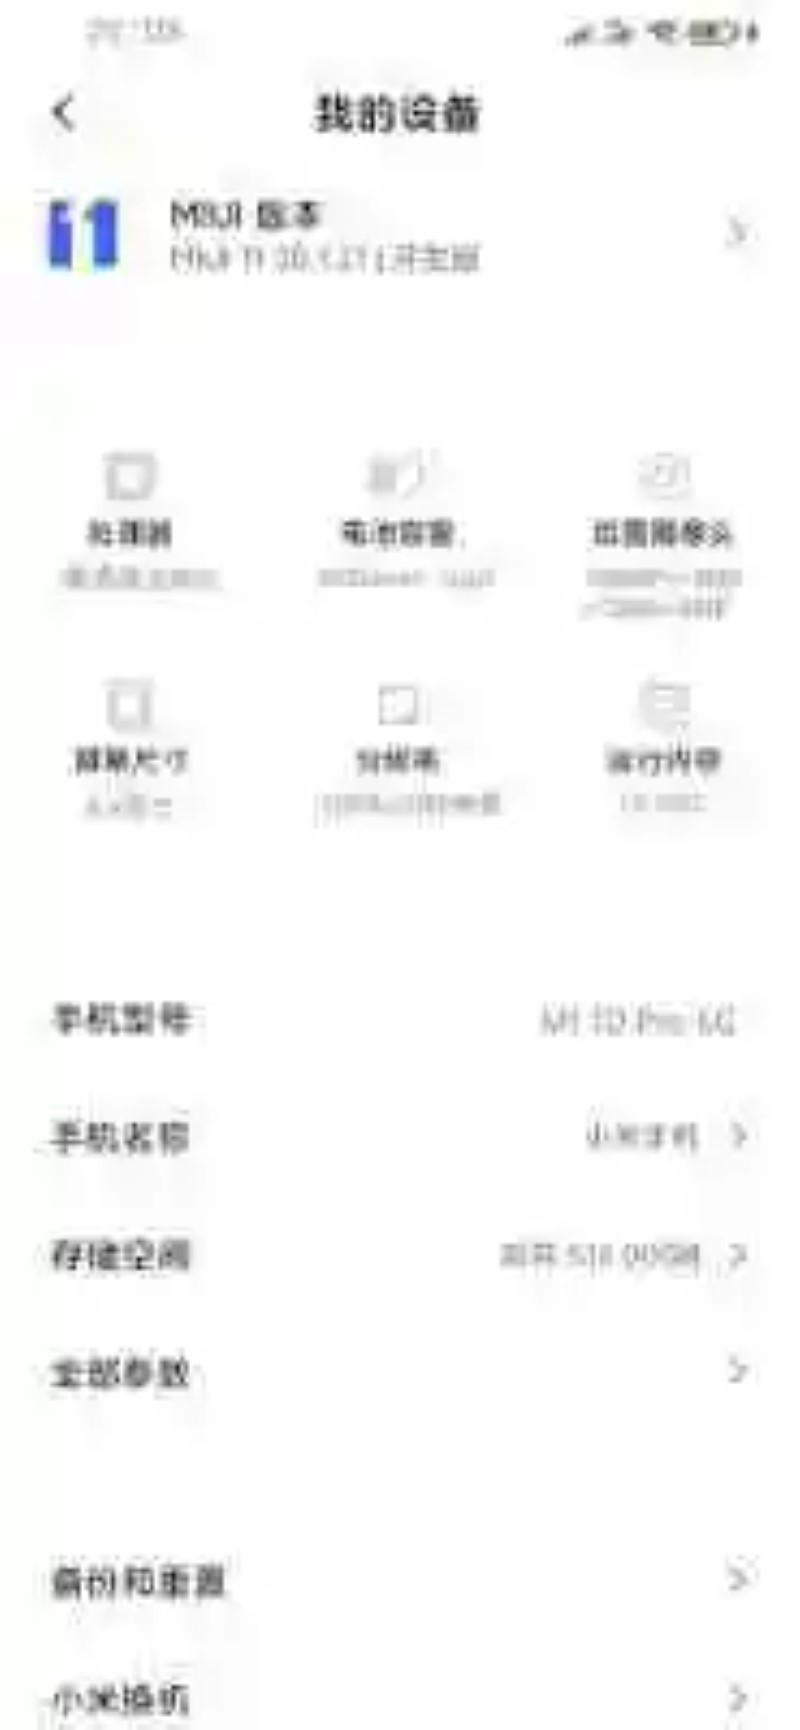 The Xiaomi Mi 10 Pro 5G will have 16 GB of RAM, and a battery of 5,000 mAh, according to leaks